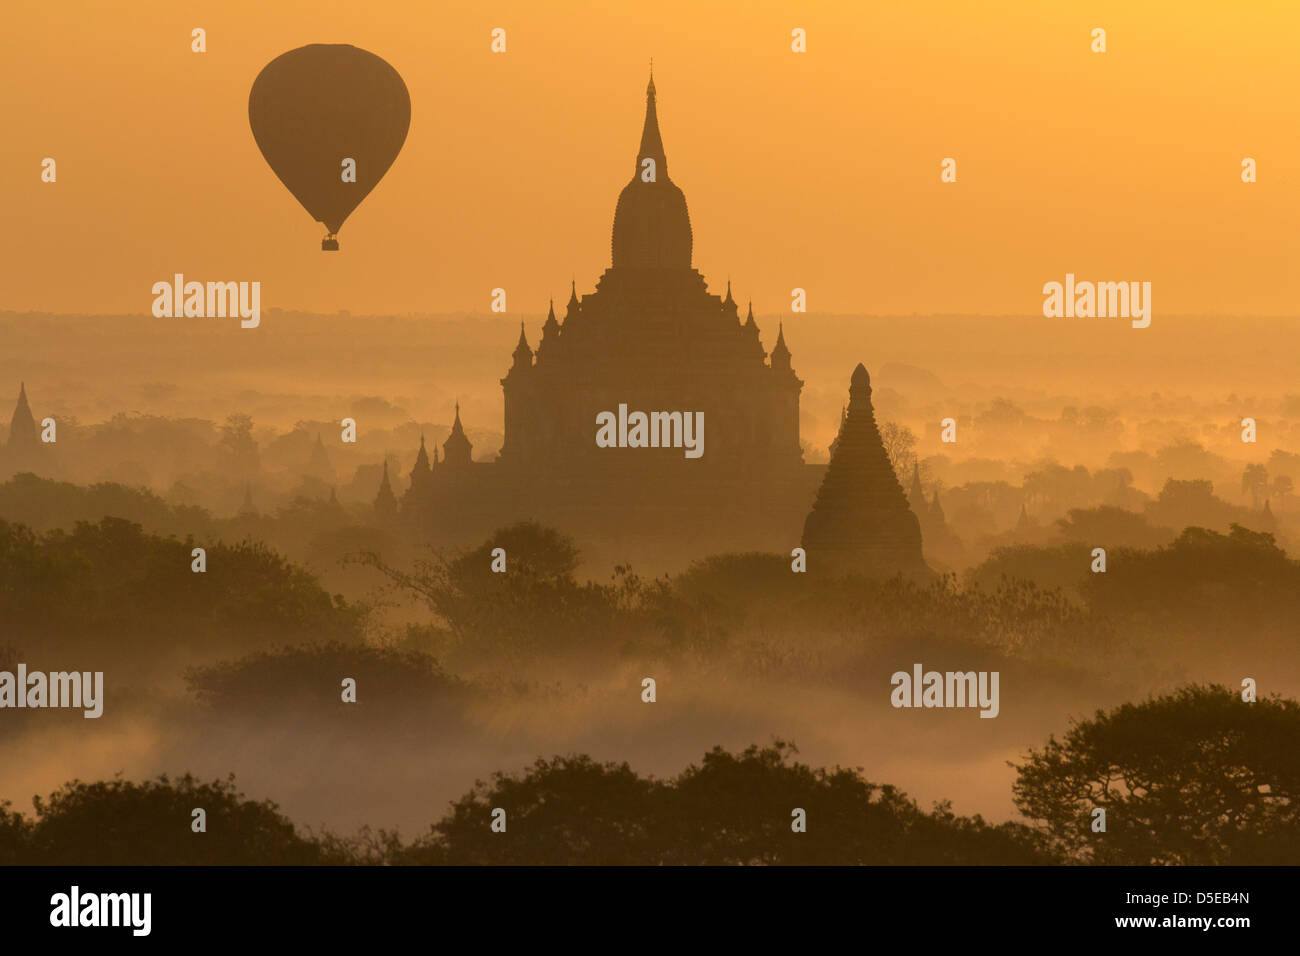 Sunrise with balloons over the pagodas of Bagan, Myanmar 5 Stock Photo